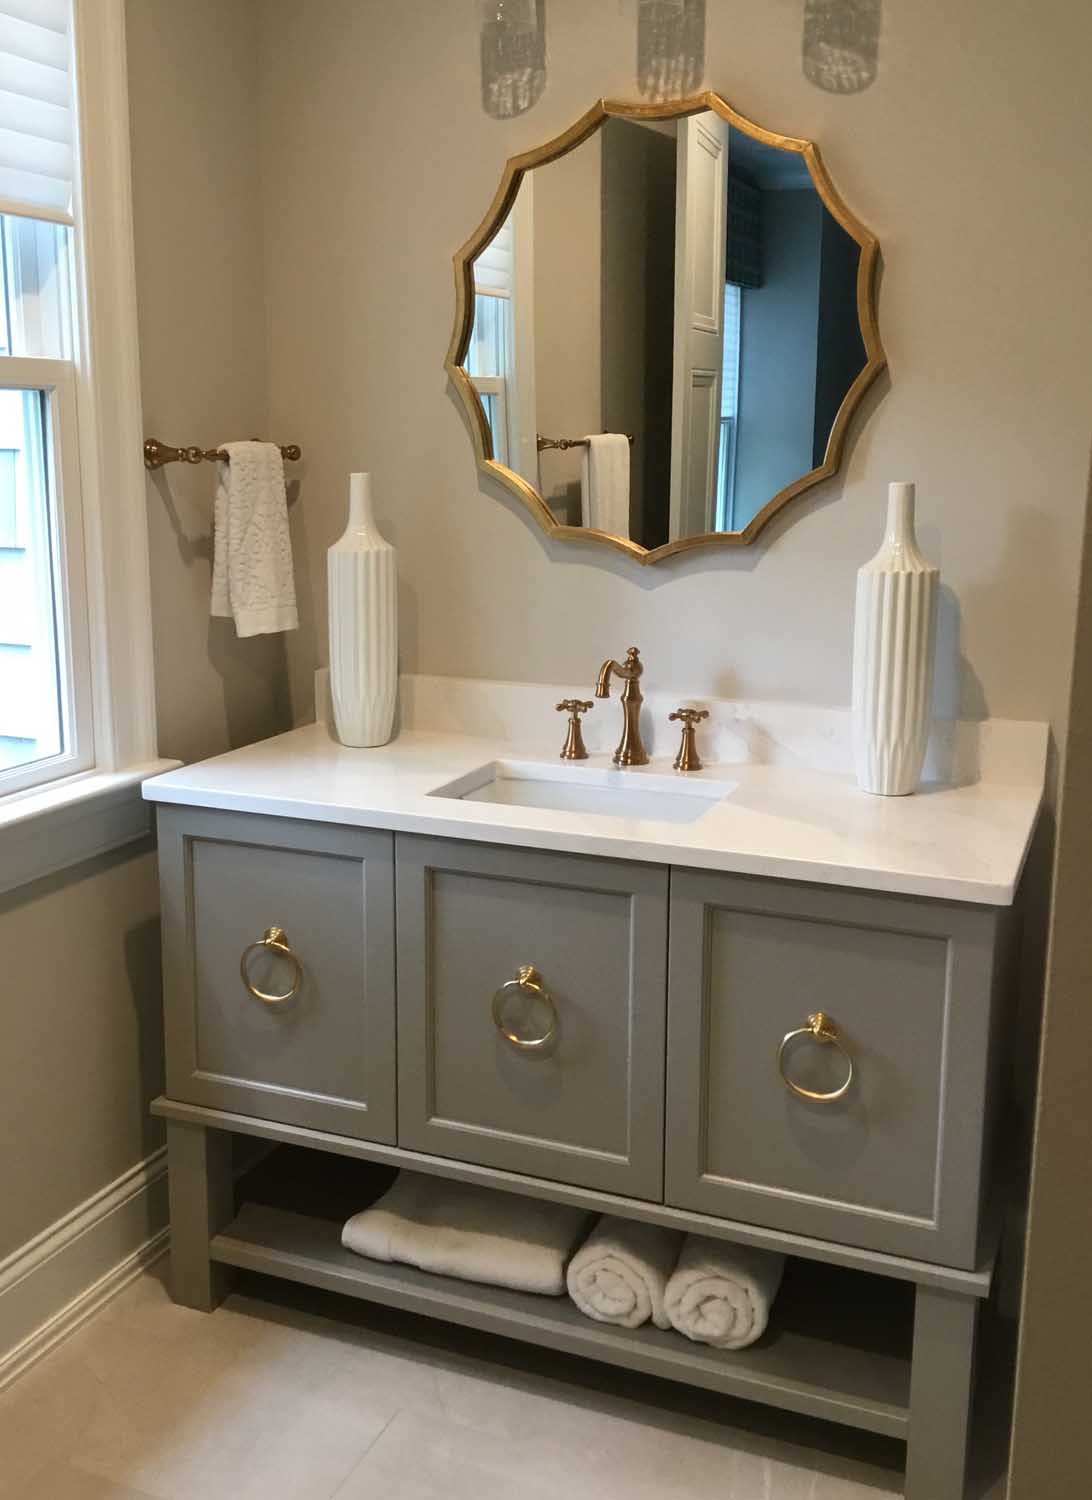 30 Bathroom Cabinet Color Ideas From Basic To Bold